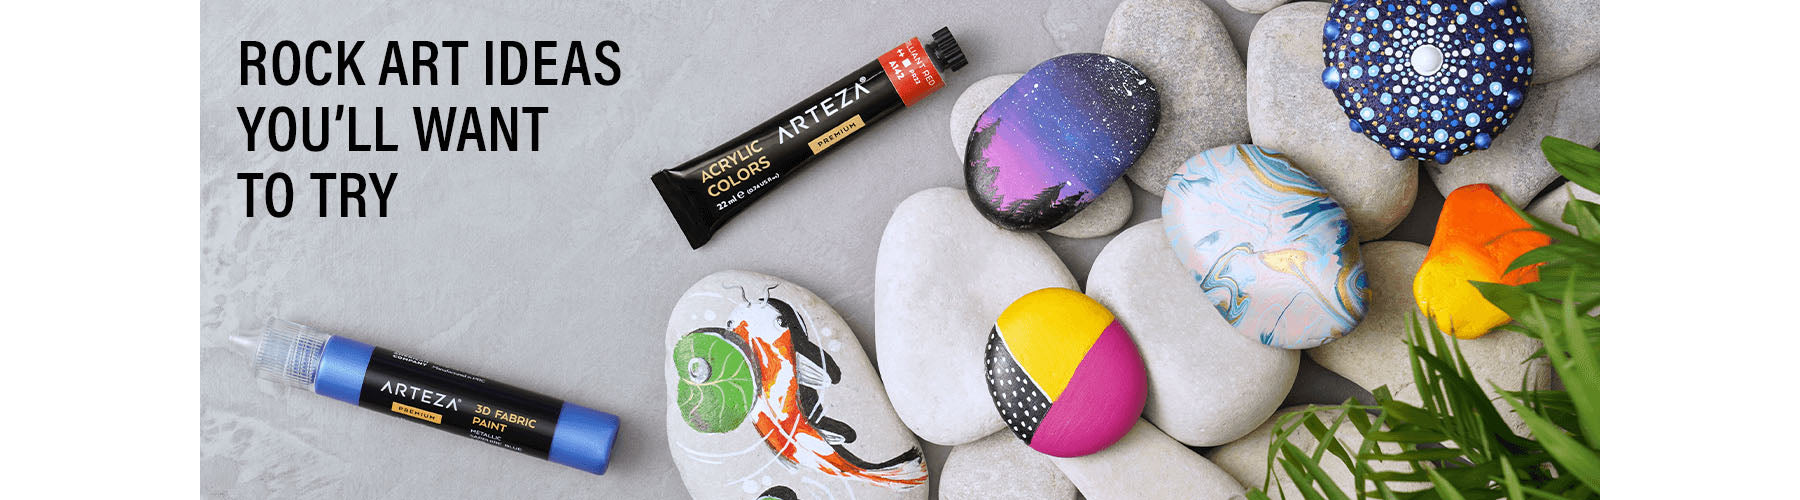 Where to Get Rocks to Paint - Rock Painting Ideas